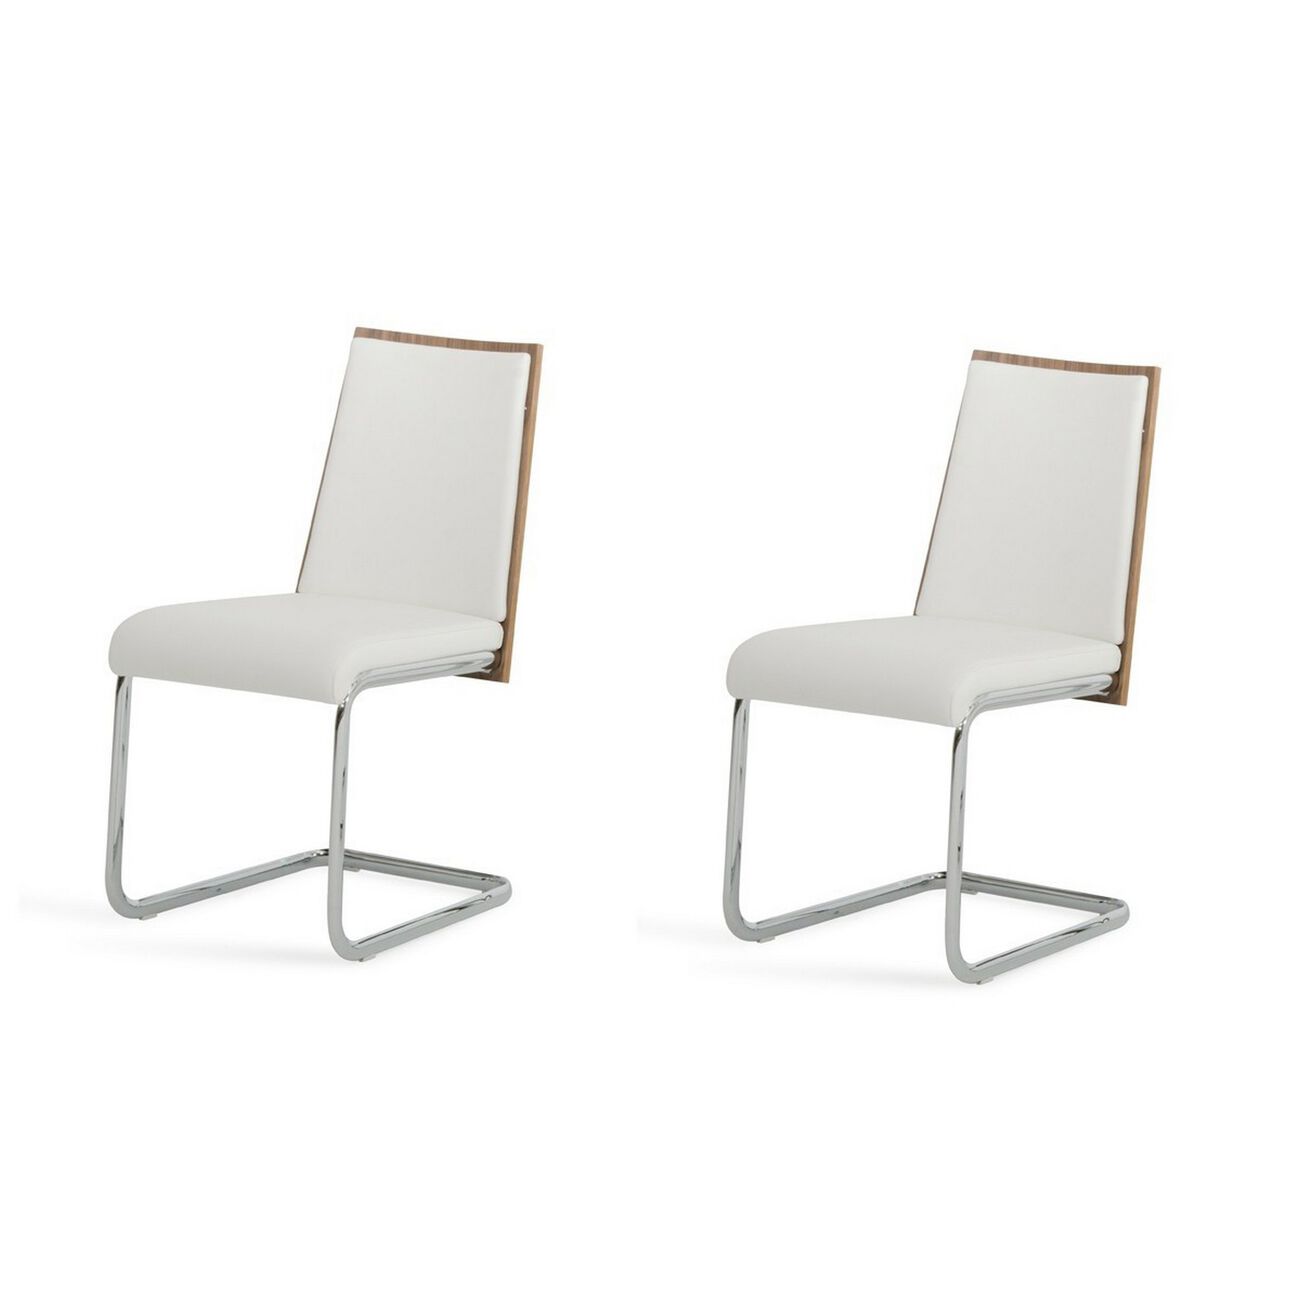 Leatherette Dining Chair with Cantilever Base, Set of 2, White and Brown